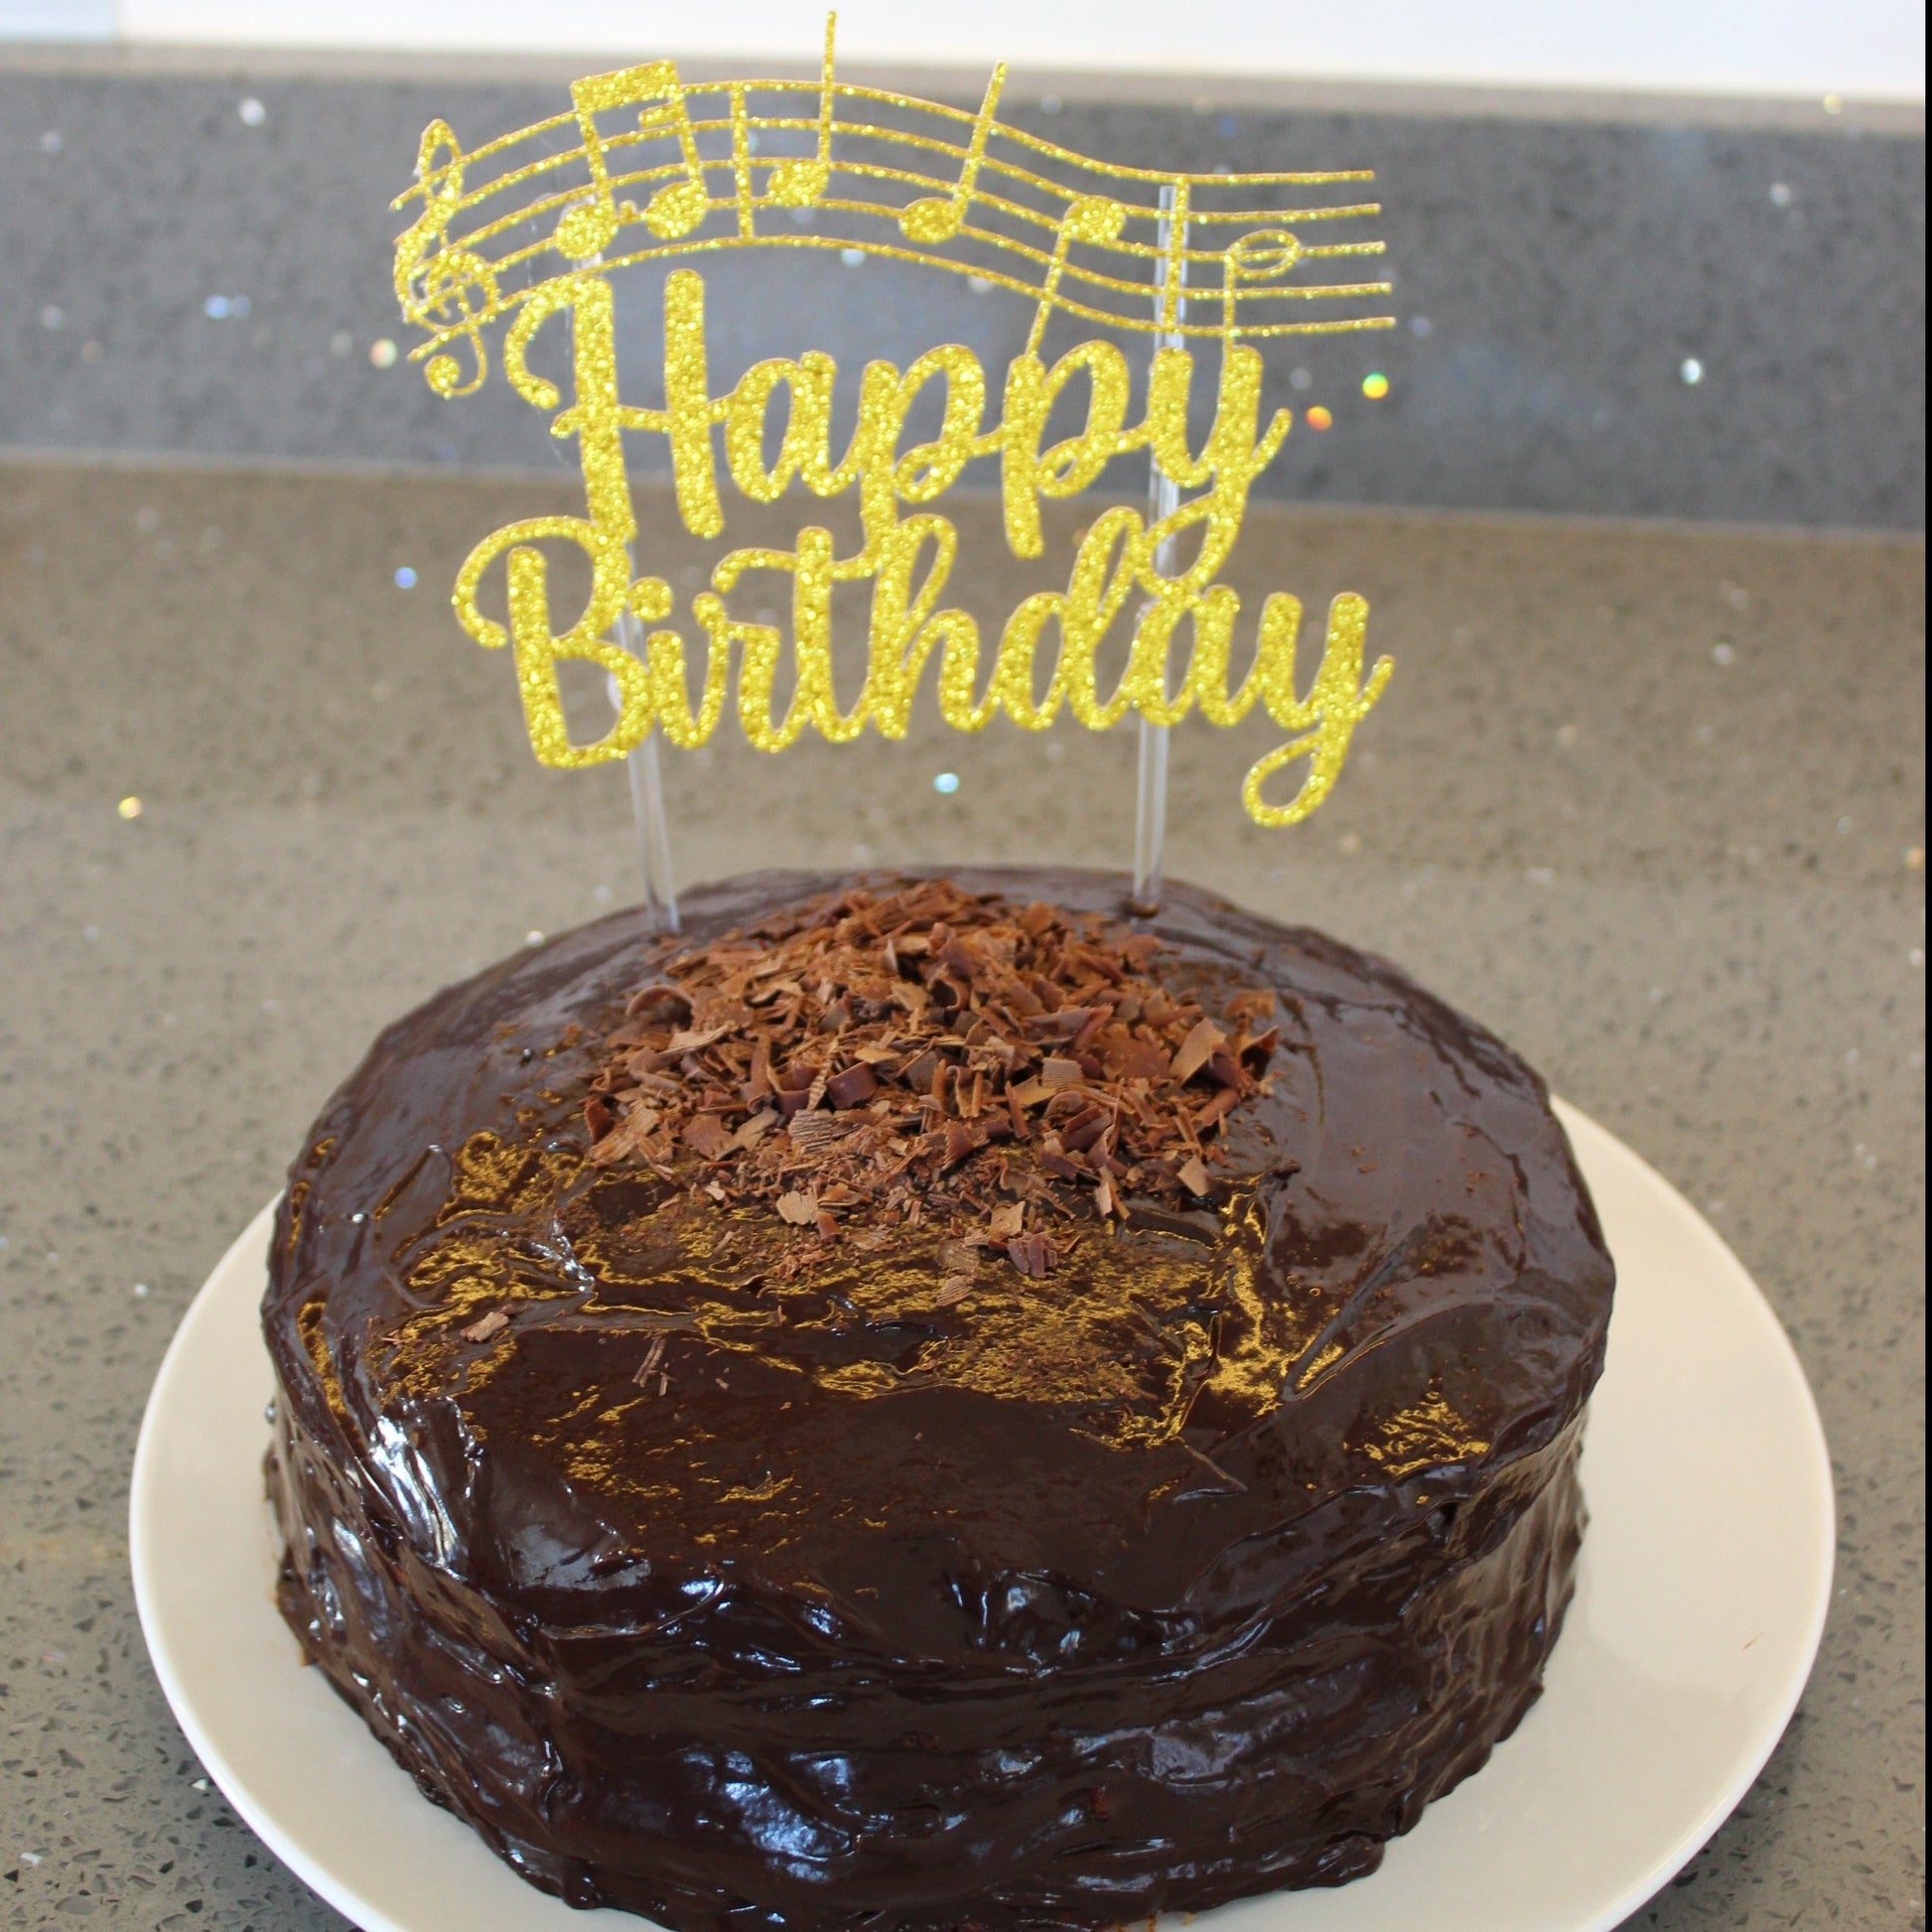 Picture of a cake with a gold glittery cake topper. Cake topper reads 'happy birthday' and shows the notes of the song 'happy birthday to you'